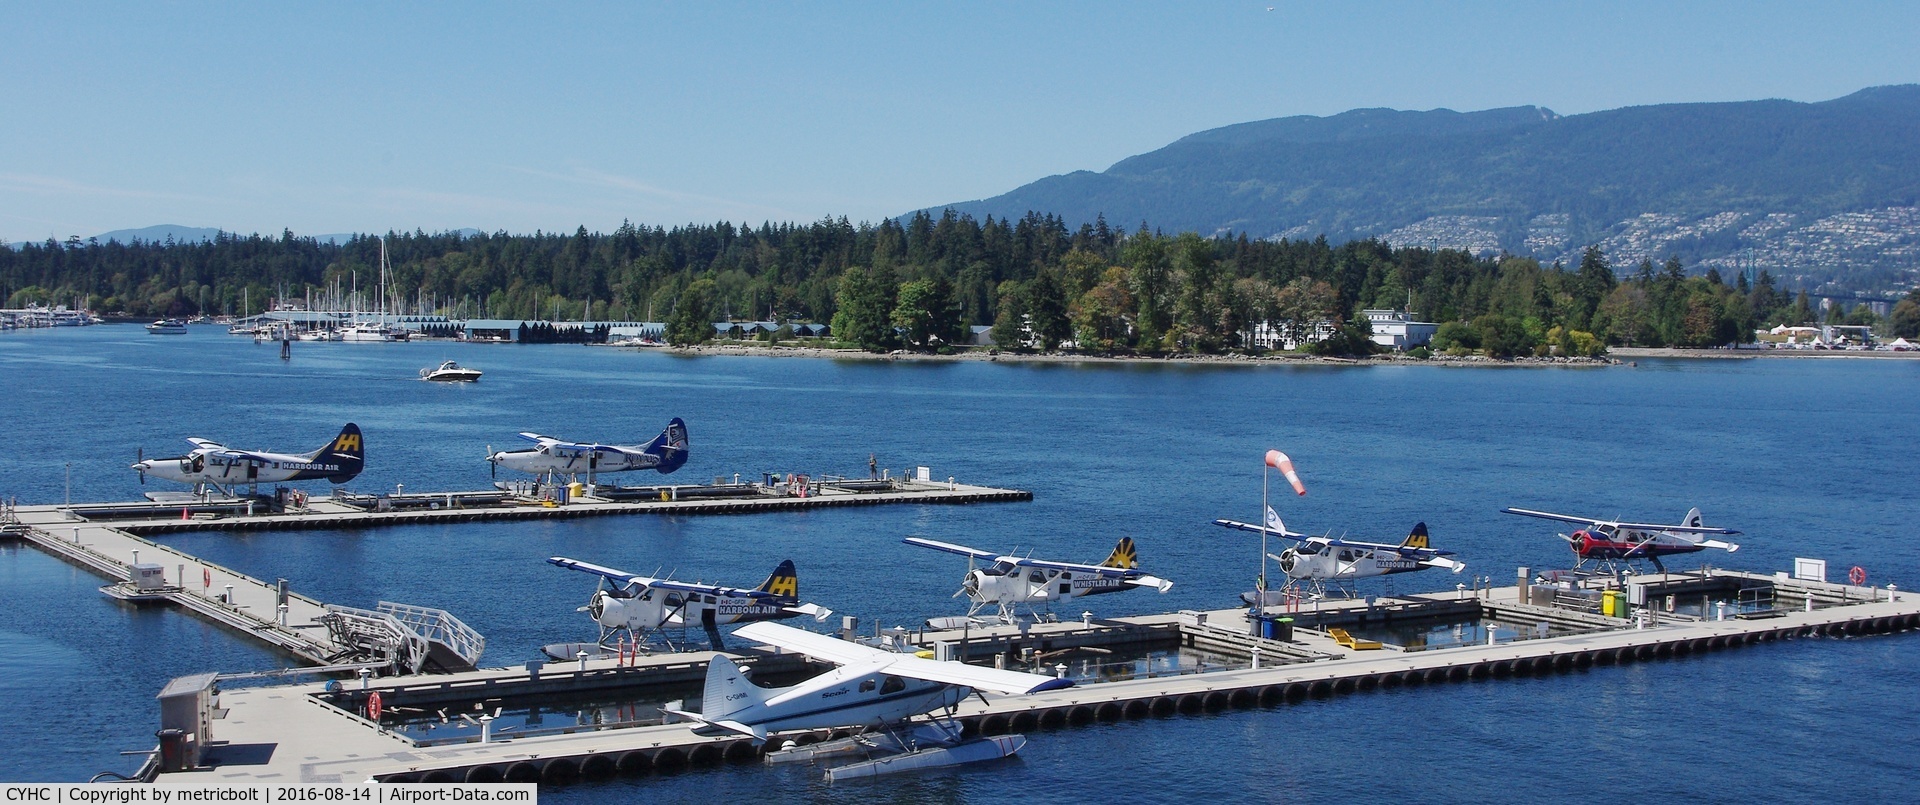 Vancouver Harbour Water Airport (Vancouver Coal Harbour Seaplane Base), Vancouver, British Columbia Canada (CYHC) - Sunday activity at Coal Harbour